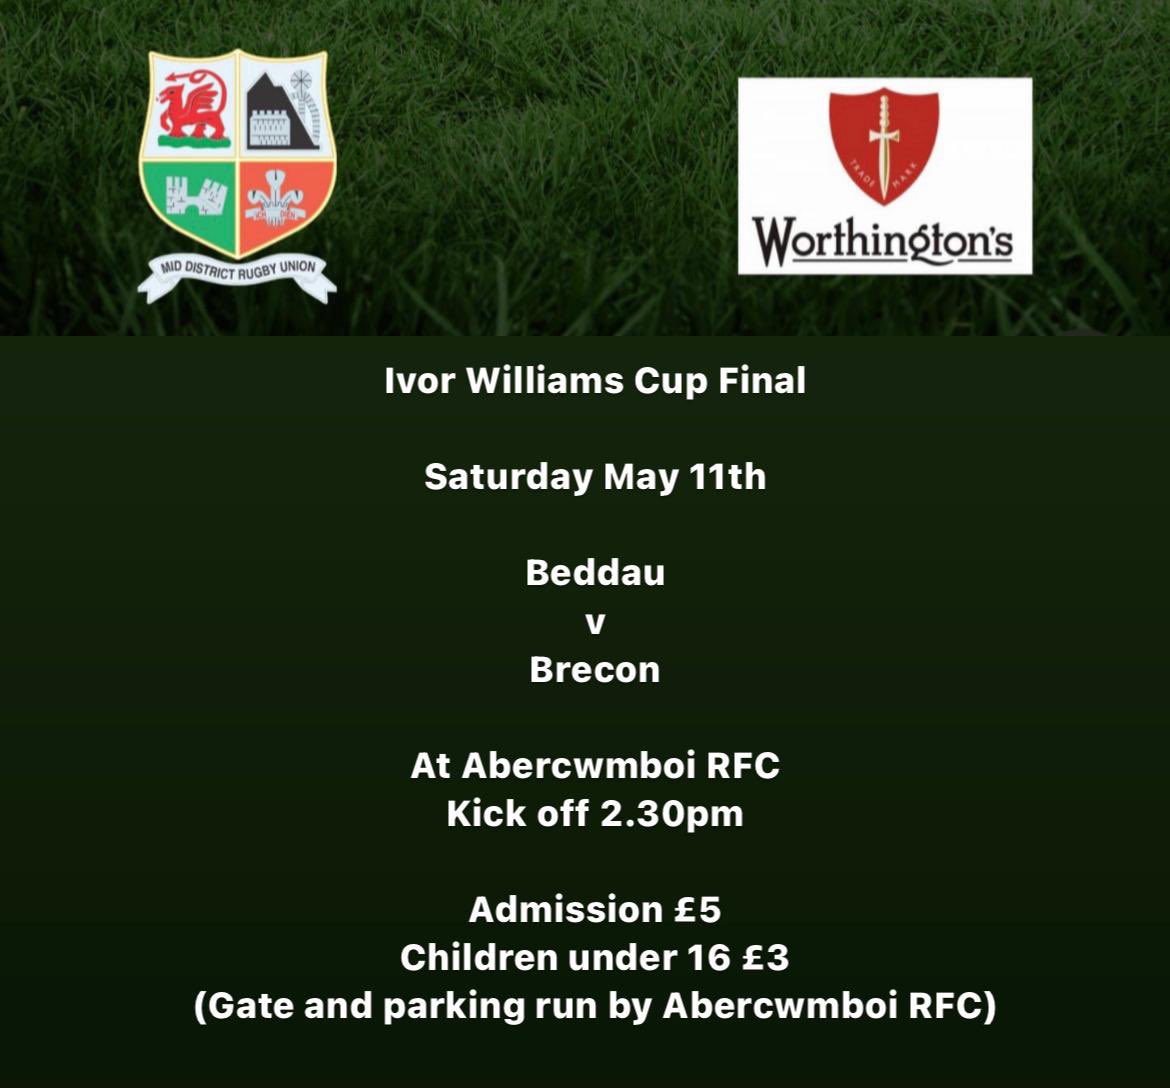 Next final is the Ivor Williams Cup on Saturday 2.30 Ko @AbercwmboiRFC @BeddauRFC v @BRECONRFC Should be a cracking day for it ☀️☀️🏆🏉